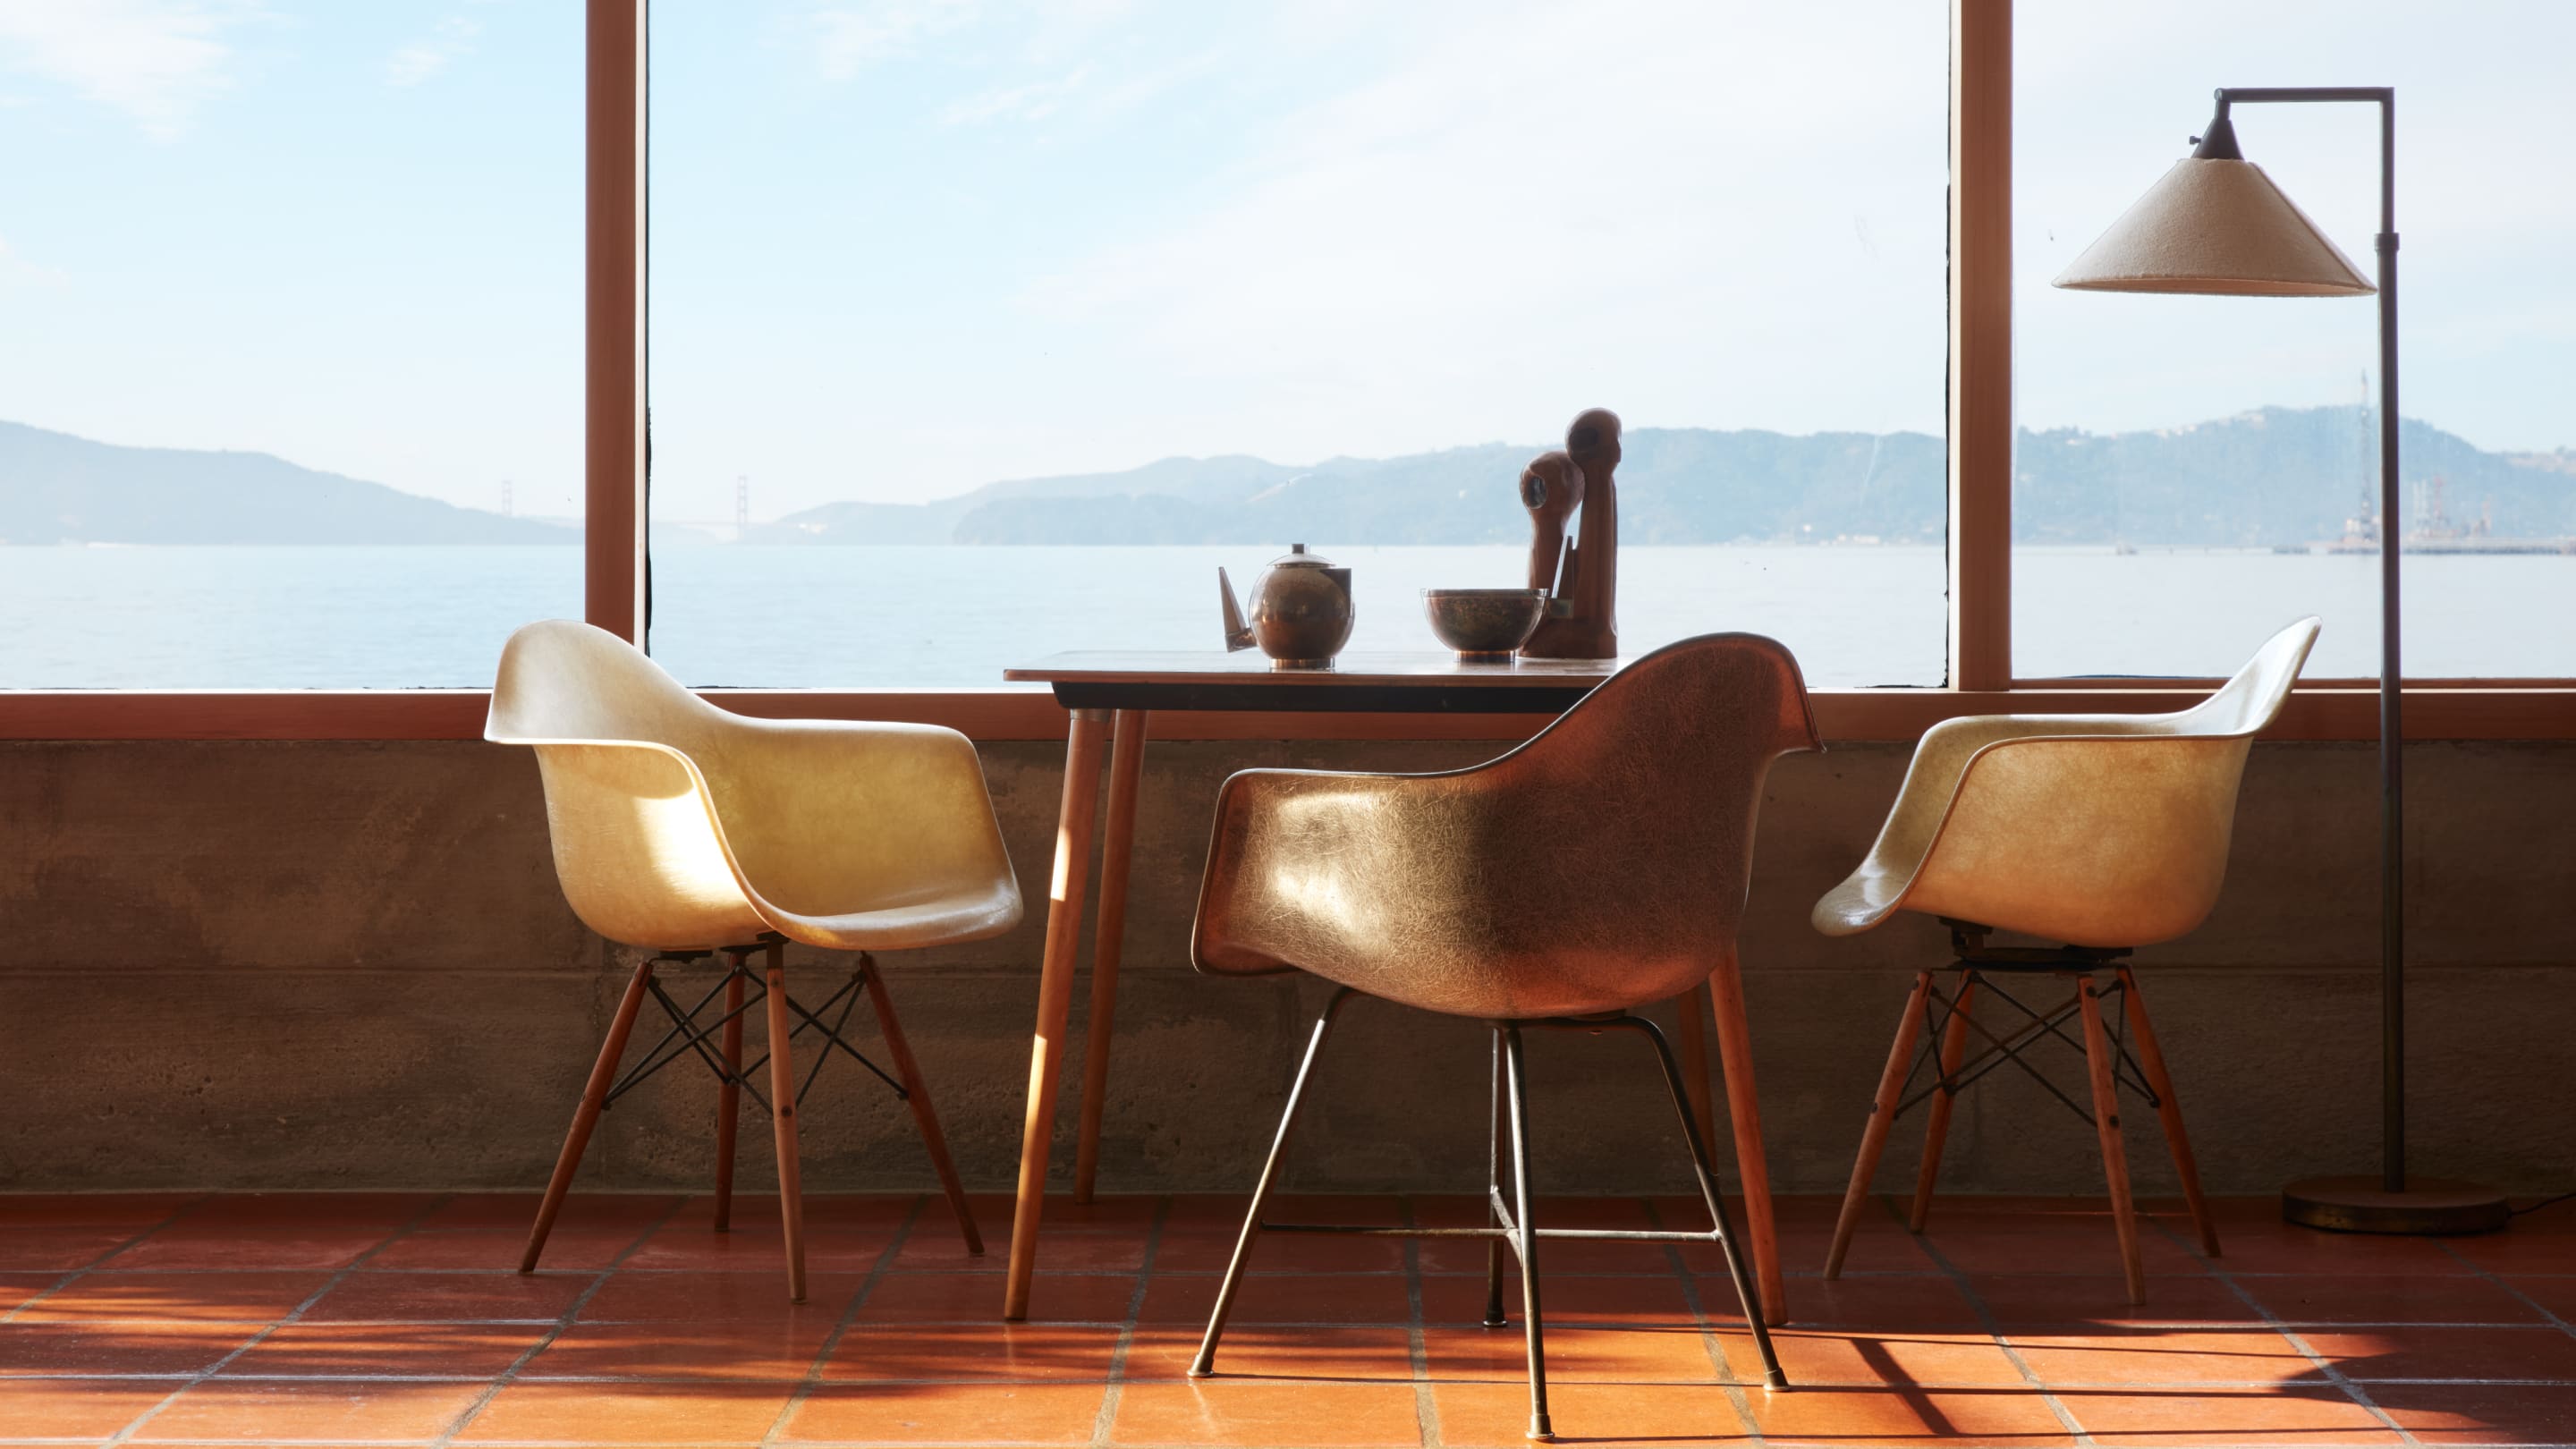 A trio of Eames vintage fiberglass armchairs in Steve Cabella's home overlooking San Francisco Bay.